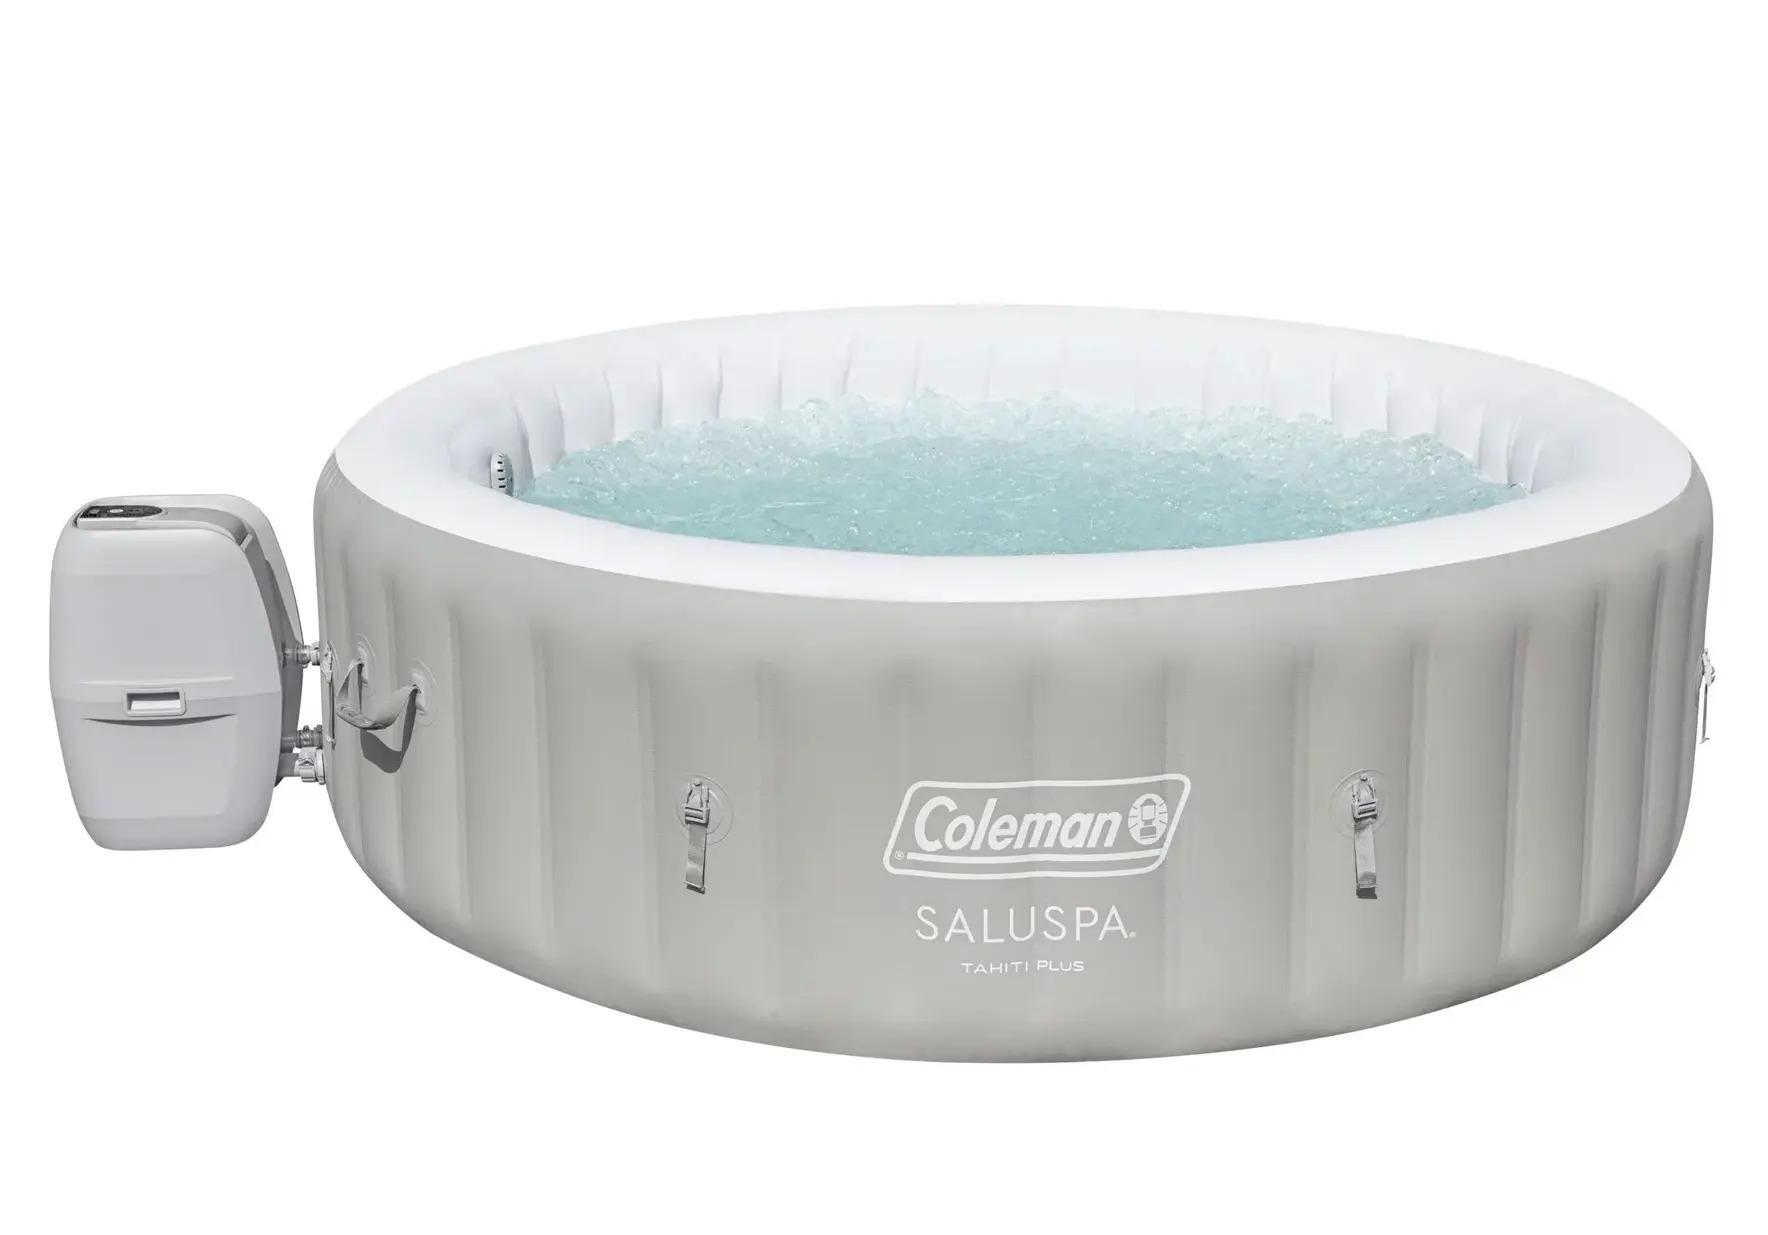 Coleman Tahiti Plus AirJet Inflatable Hot Tub Spa for $328.99 Shipped